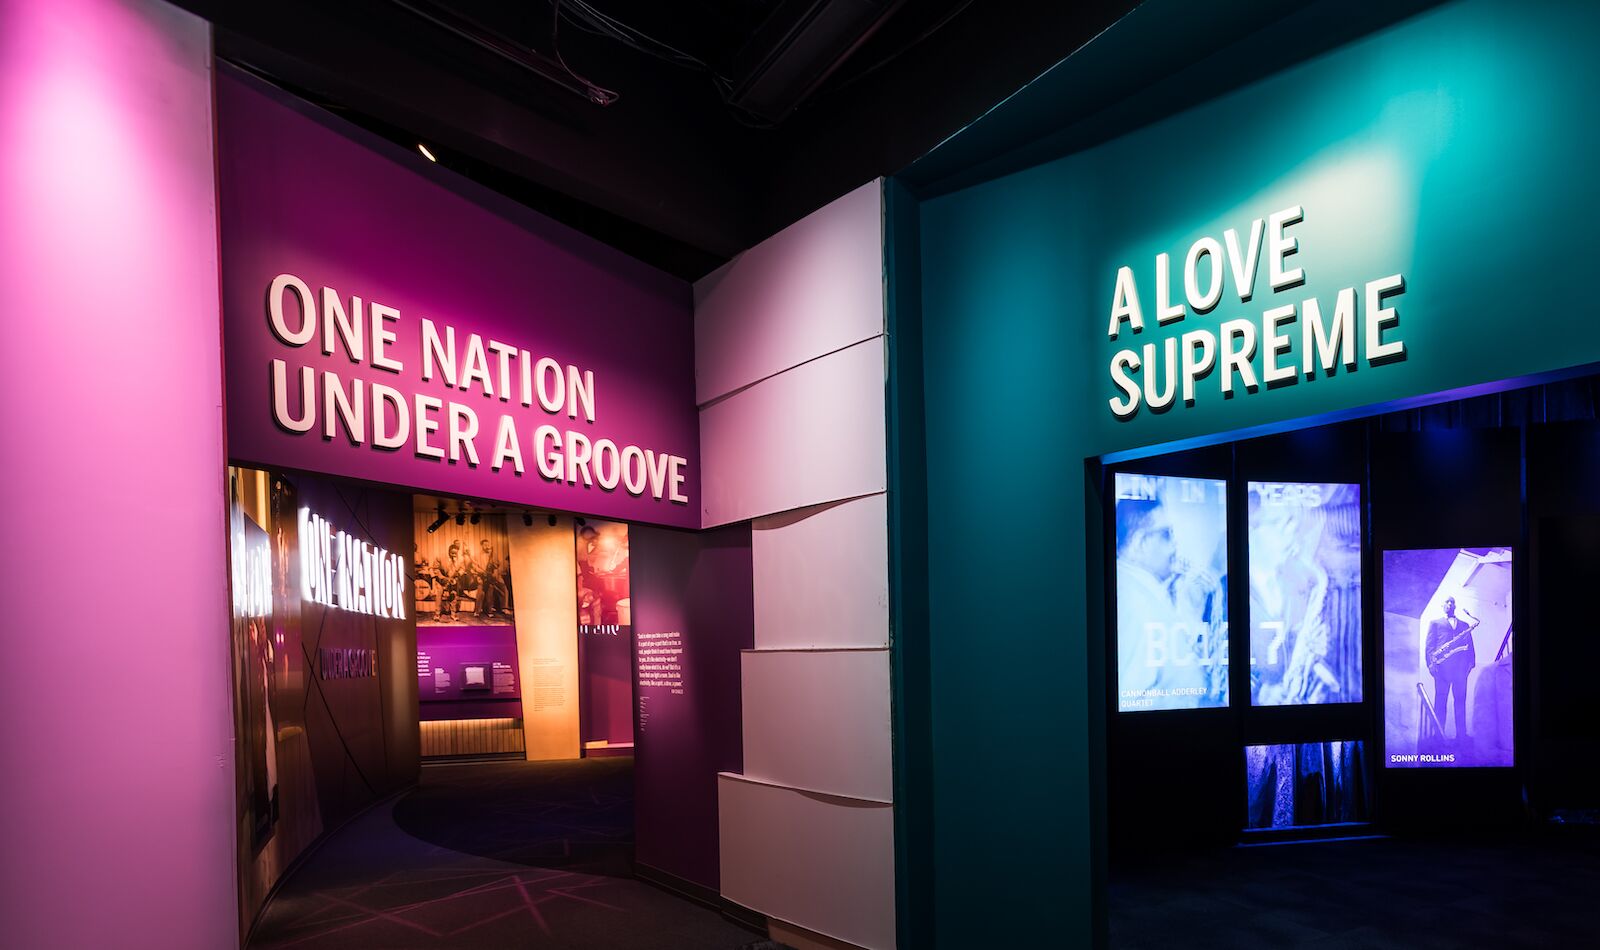 Gallery at the National Museum of African American Music in Nashville, Tennessee